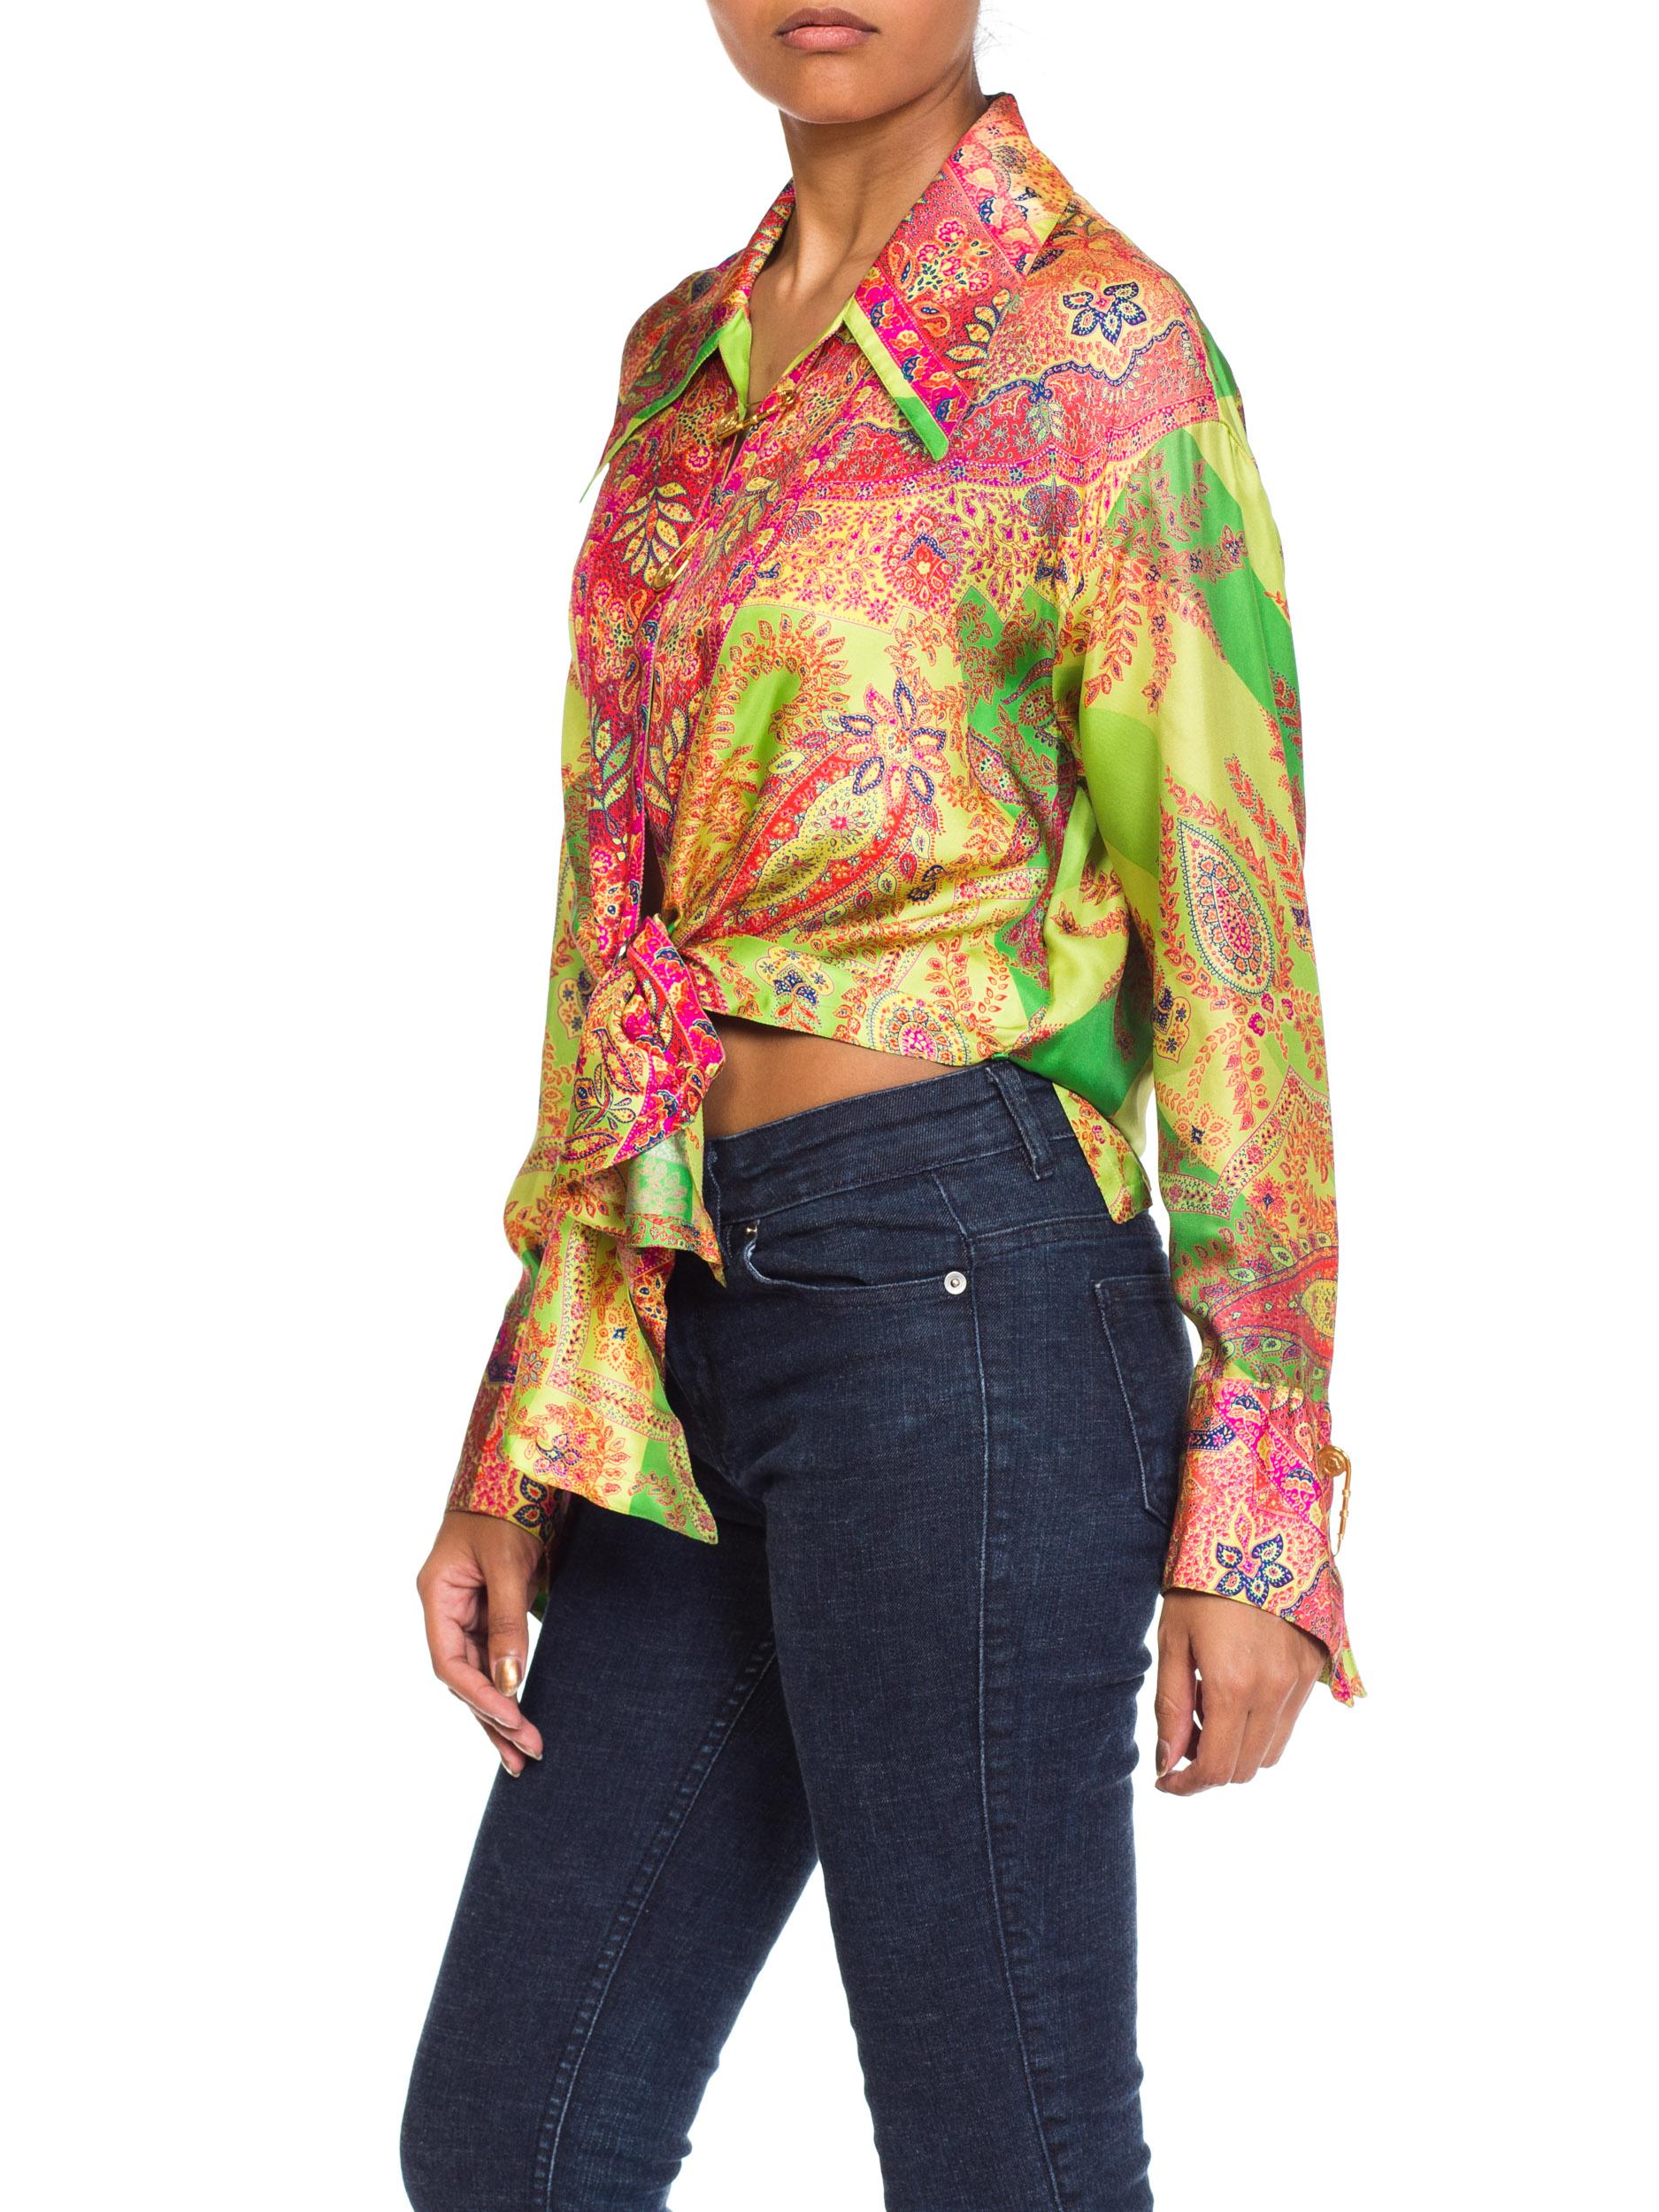 1990S GIANNI VERSACE Paisley Silk Punk Safety Pin Collection Blouse Sz 40 9